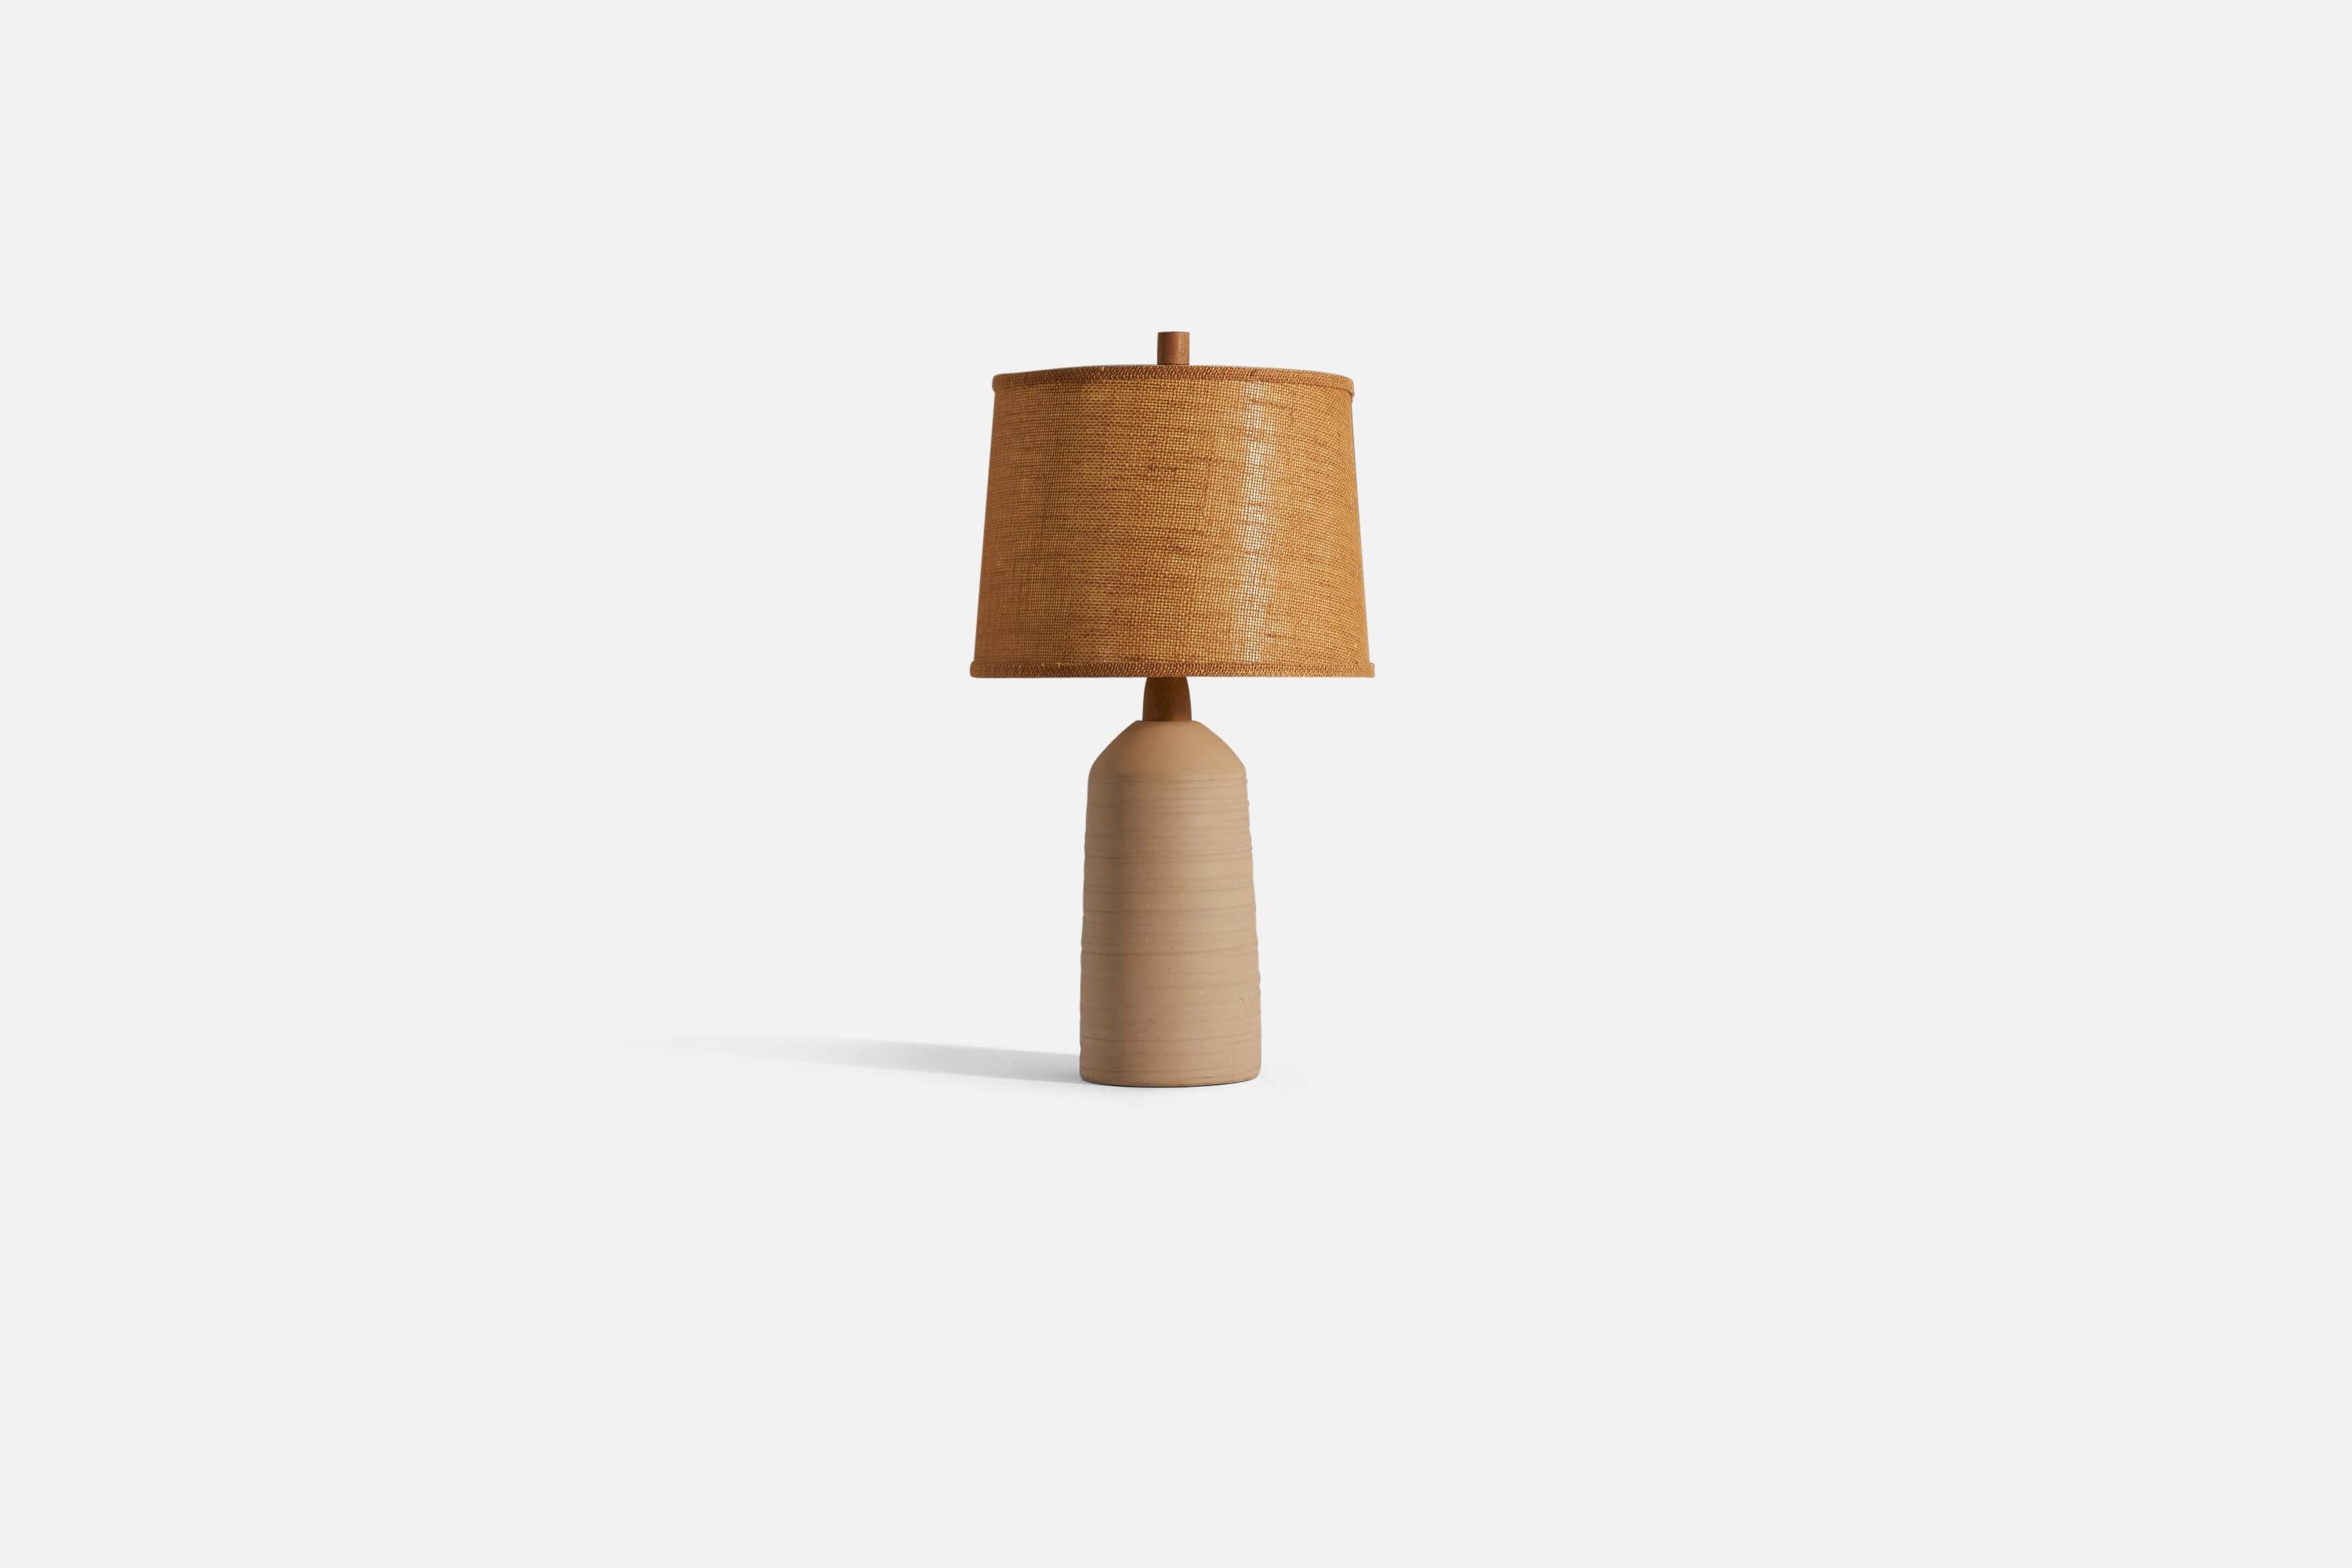 A table lamp designed by husband and wife duo Jane & Gordon Martz. Produced by Marshall Studios, Veedersburg, Indiana. 

The base is slip-cast and signed.

Sold with lampshade and finial. 
Dimensions of lamp (inches) : 28.25 x 6.75 x 6.75 (H x